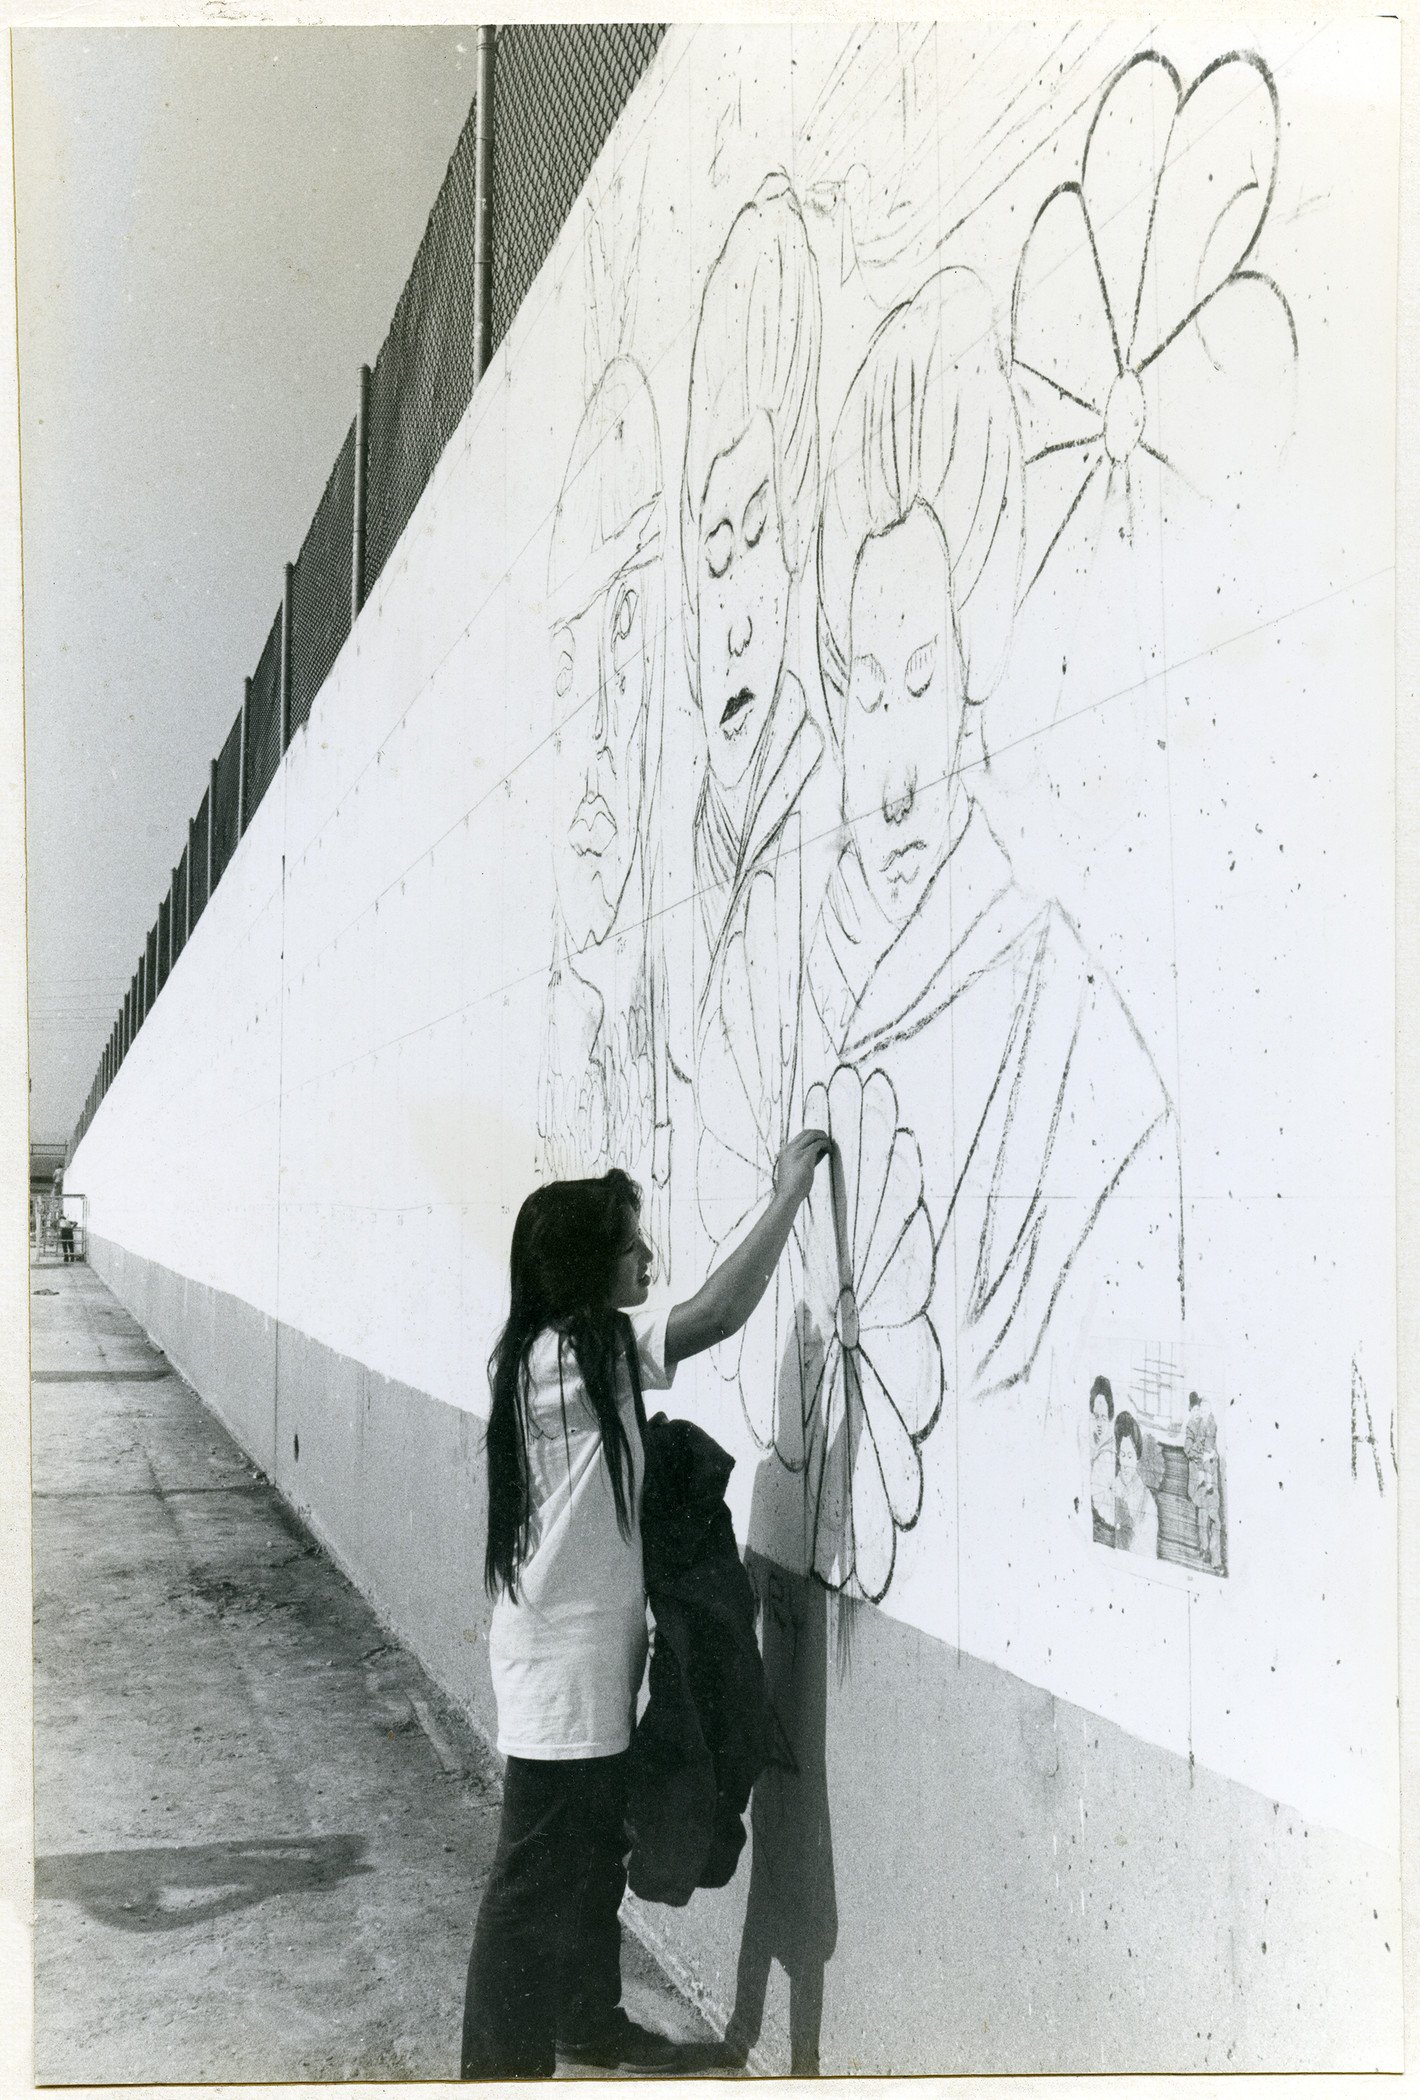  Sketching on the wall at  The Great Wall of Los Angeles ,&nbsp;© SPARC 1976, courtesy of Judith F. Baca and the SPARC archives. Photo: Linda Eber, 1976. 